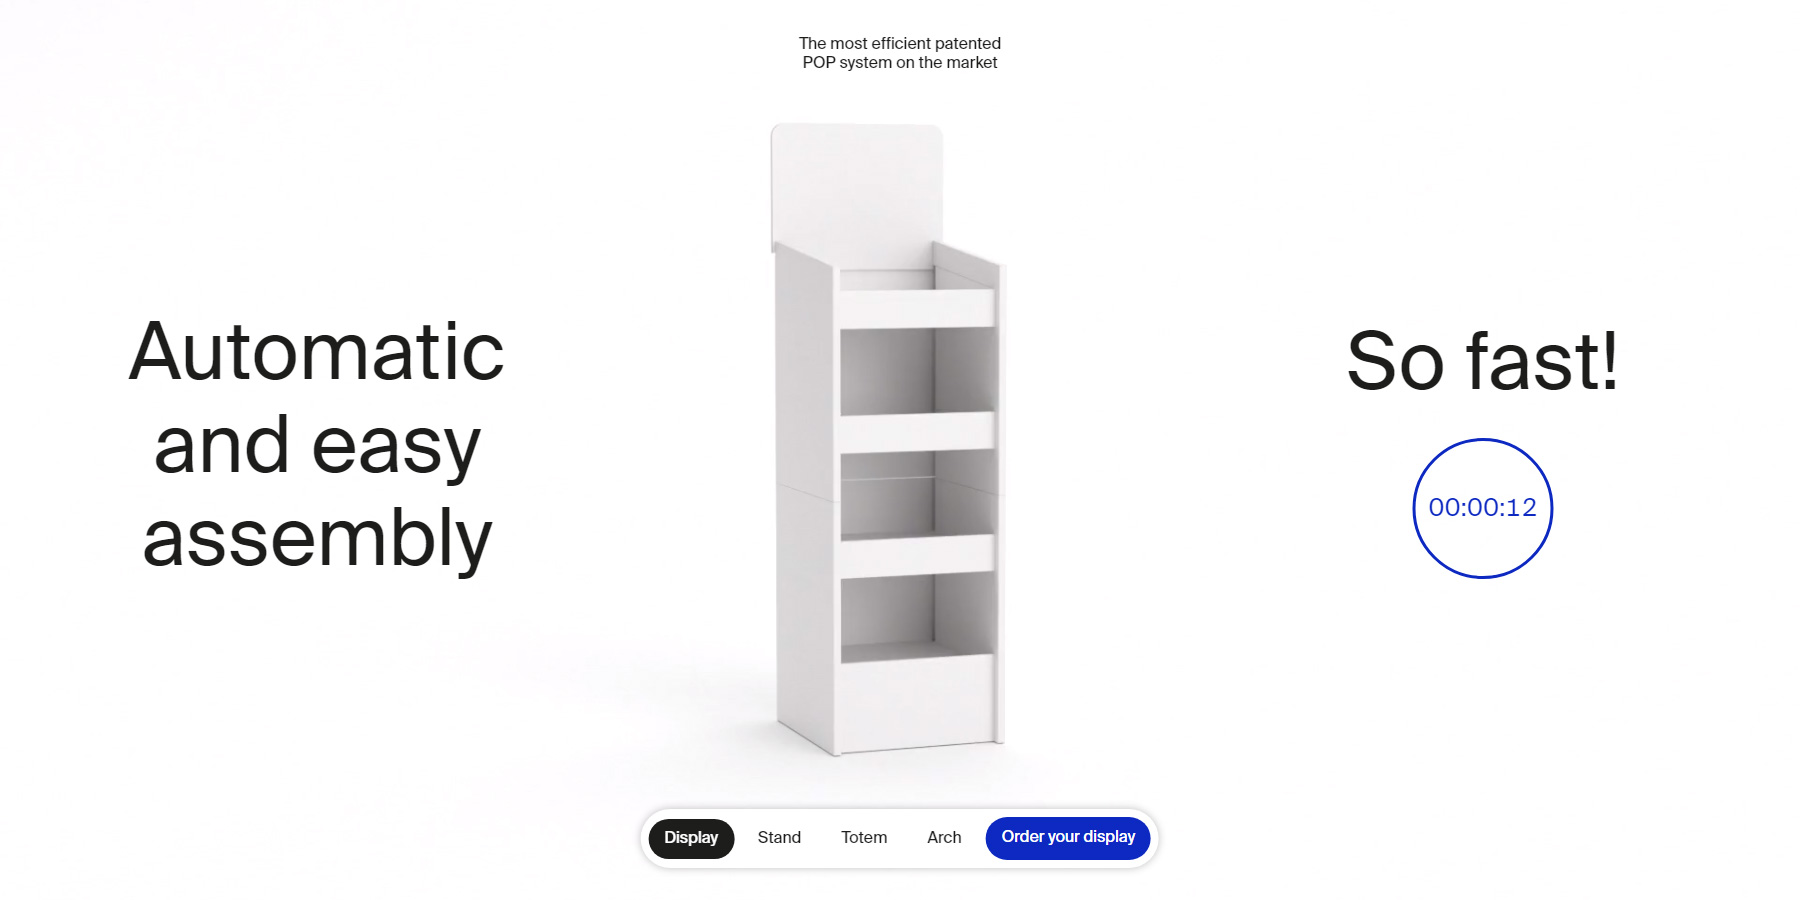 Faster Displays - Website of the Day